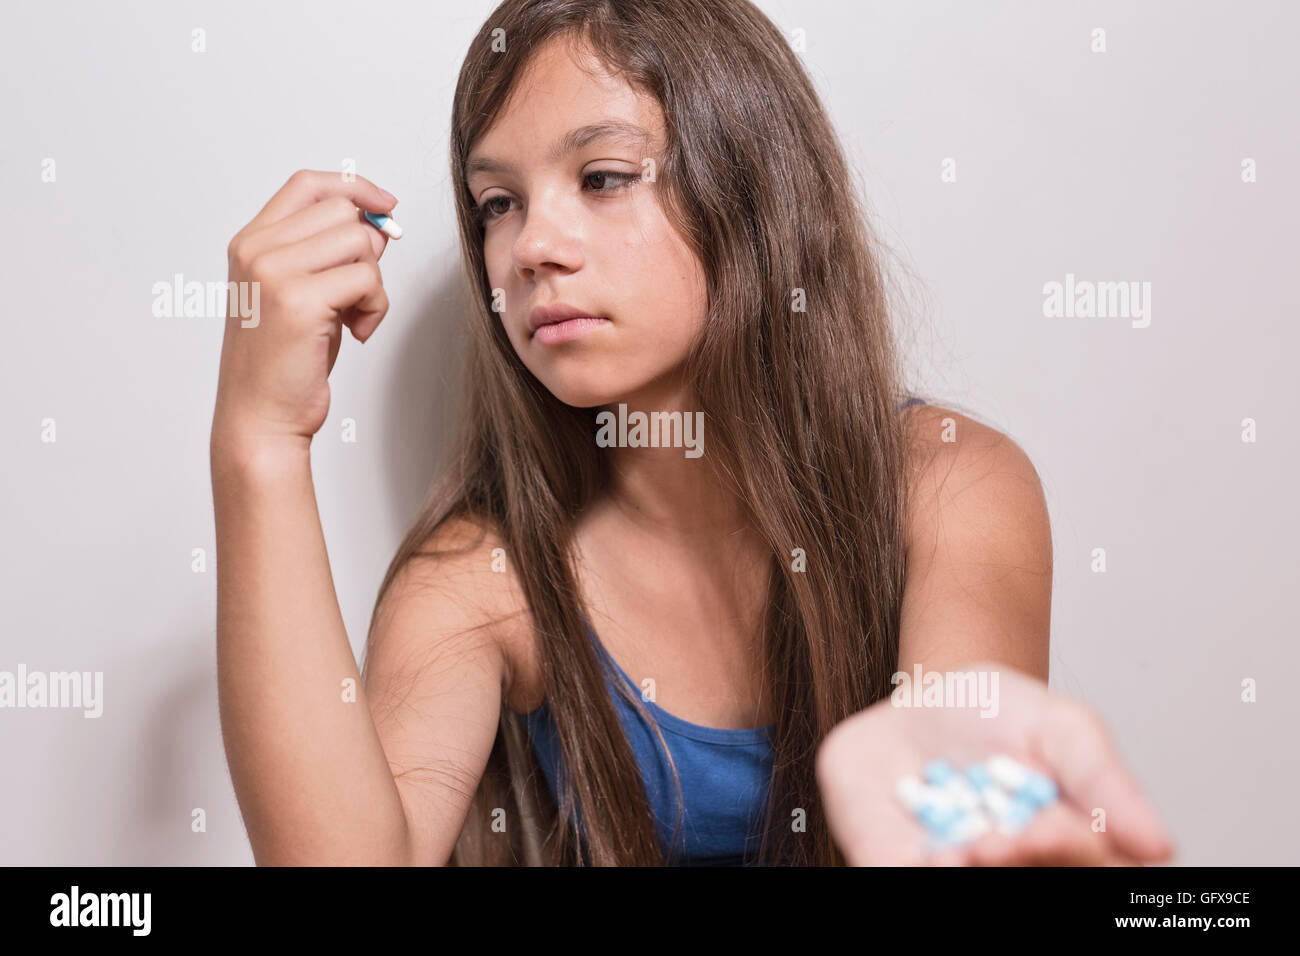 Depressed teenager with pills Stock Photo